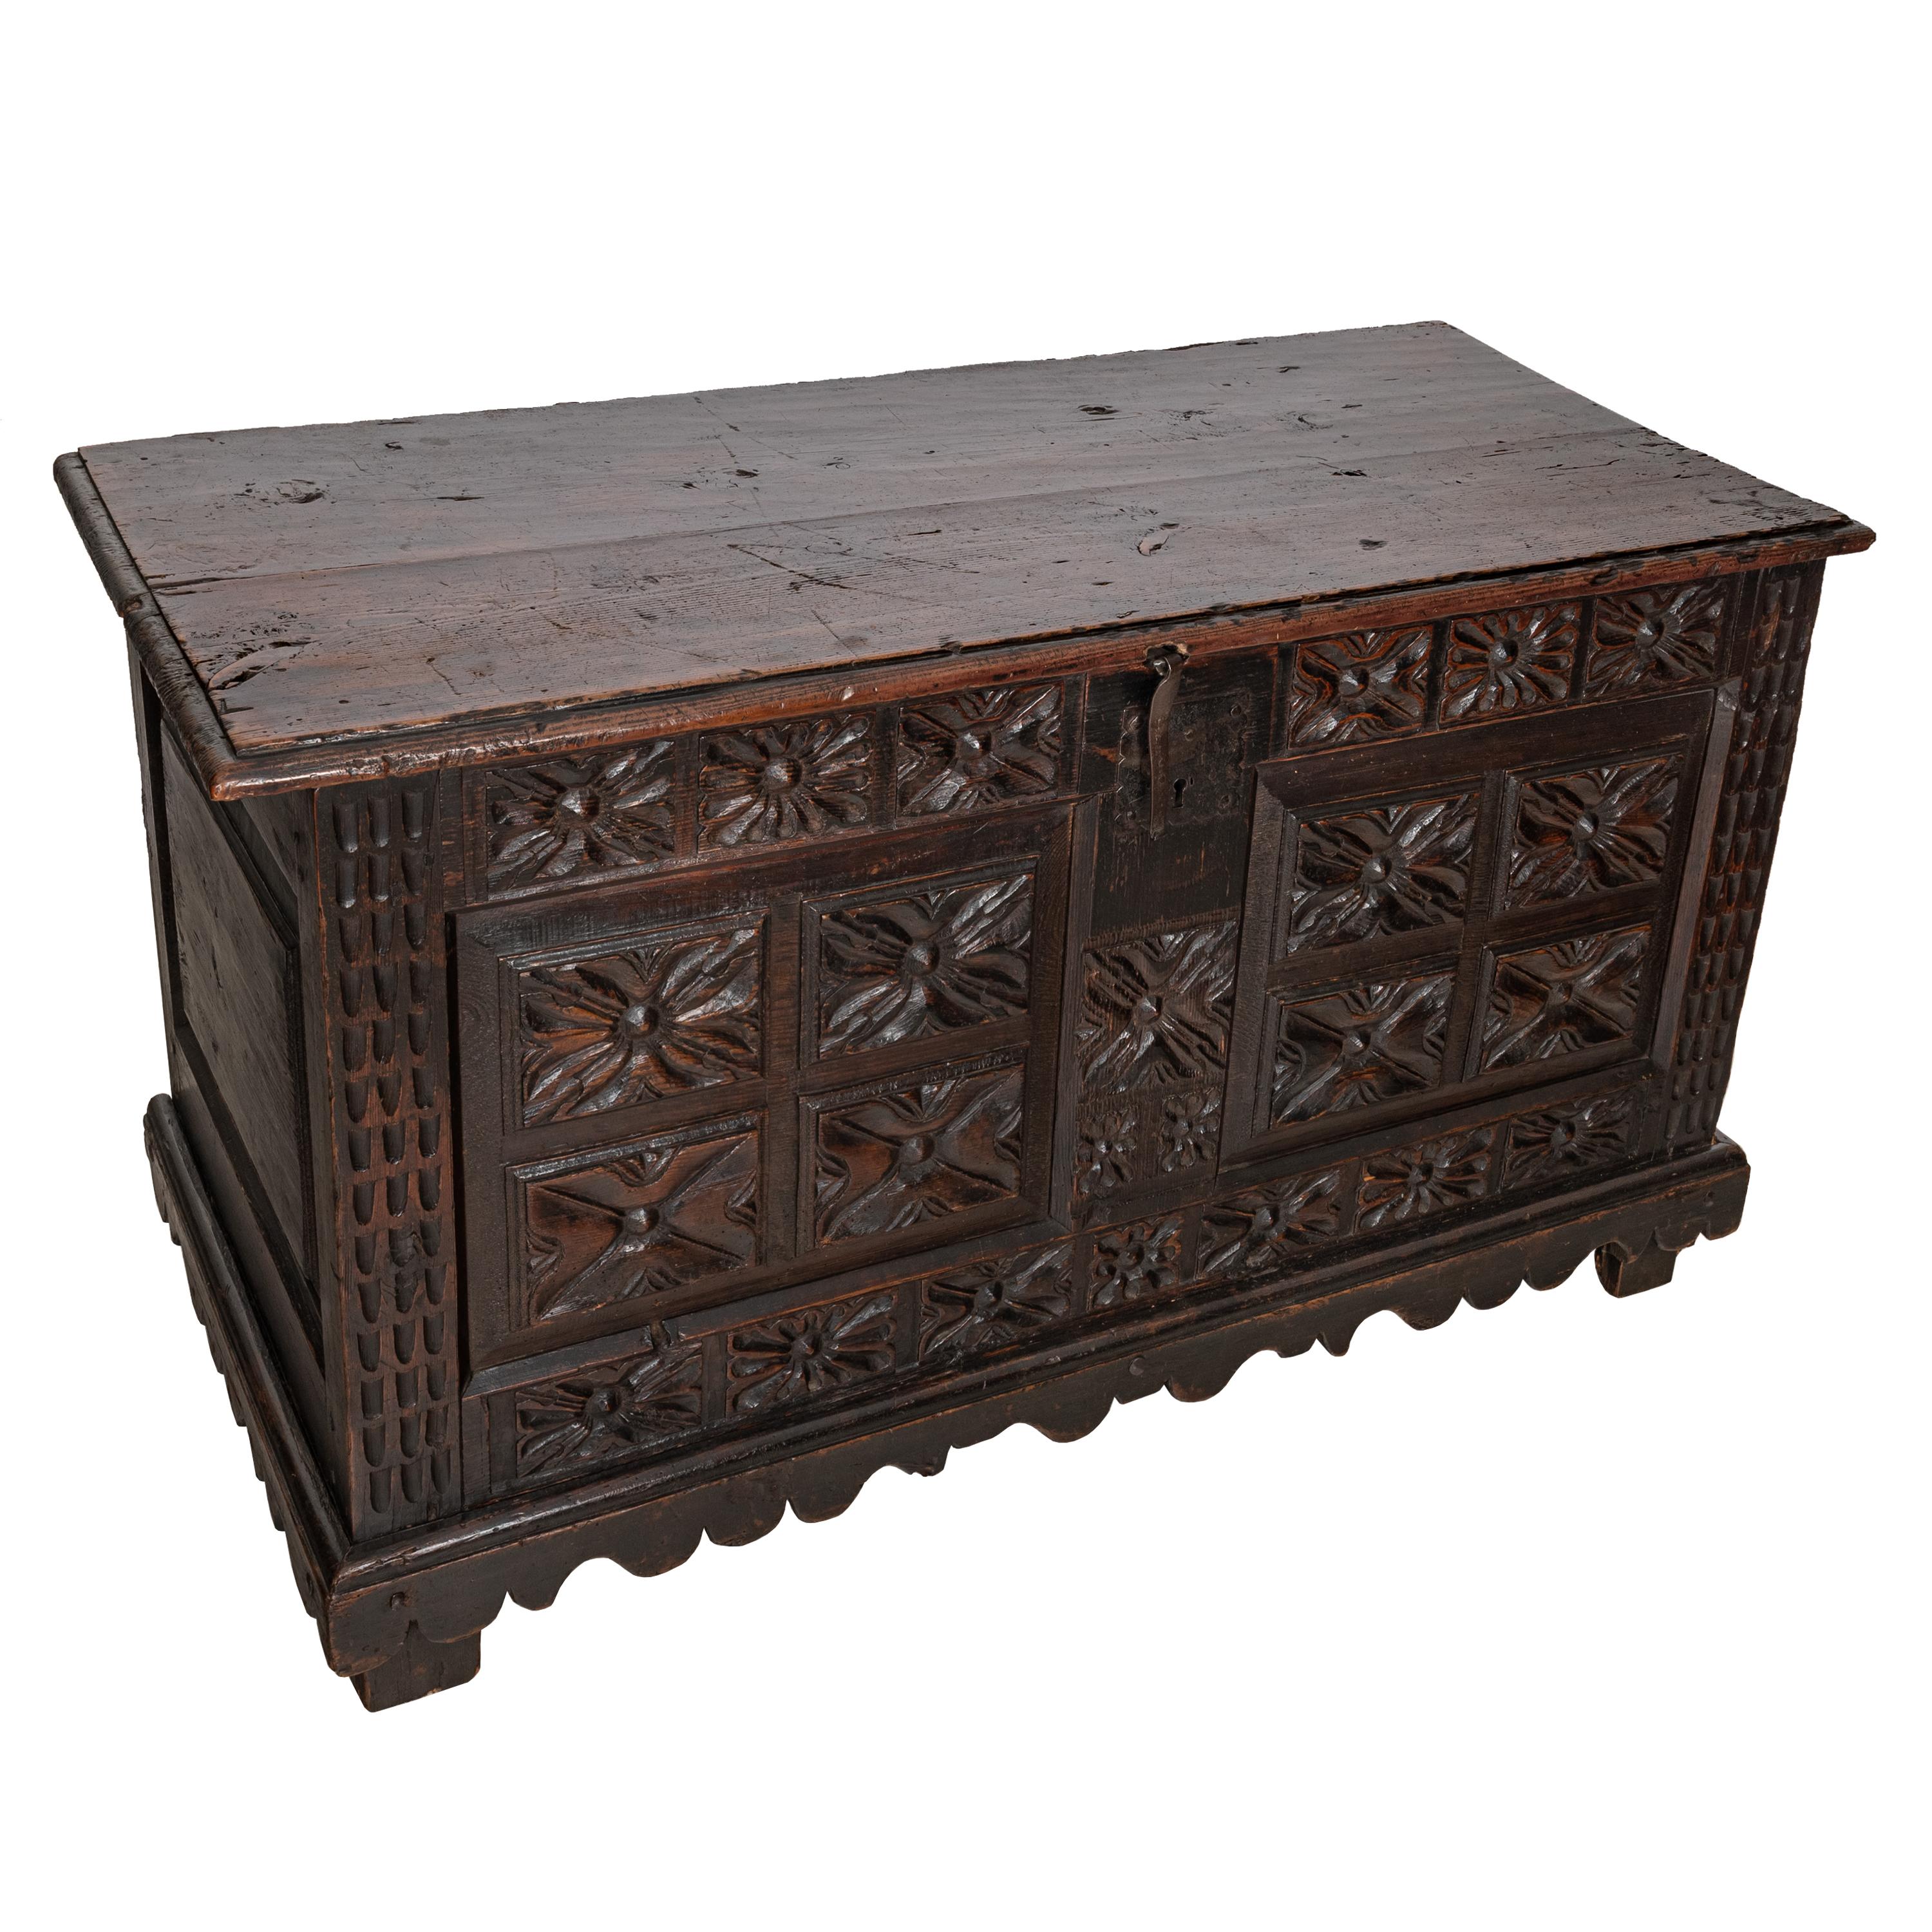 Antique 18th Century Spanish Colonial Carved Cedar Coffer Chest Mexico 1750 For Sale 3